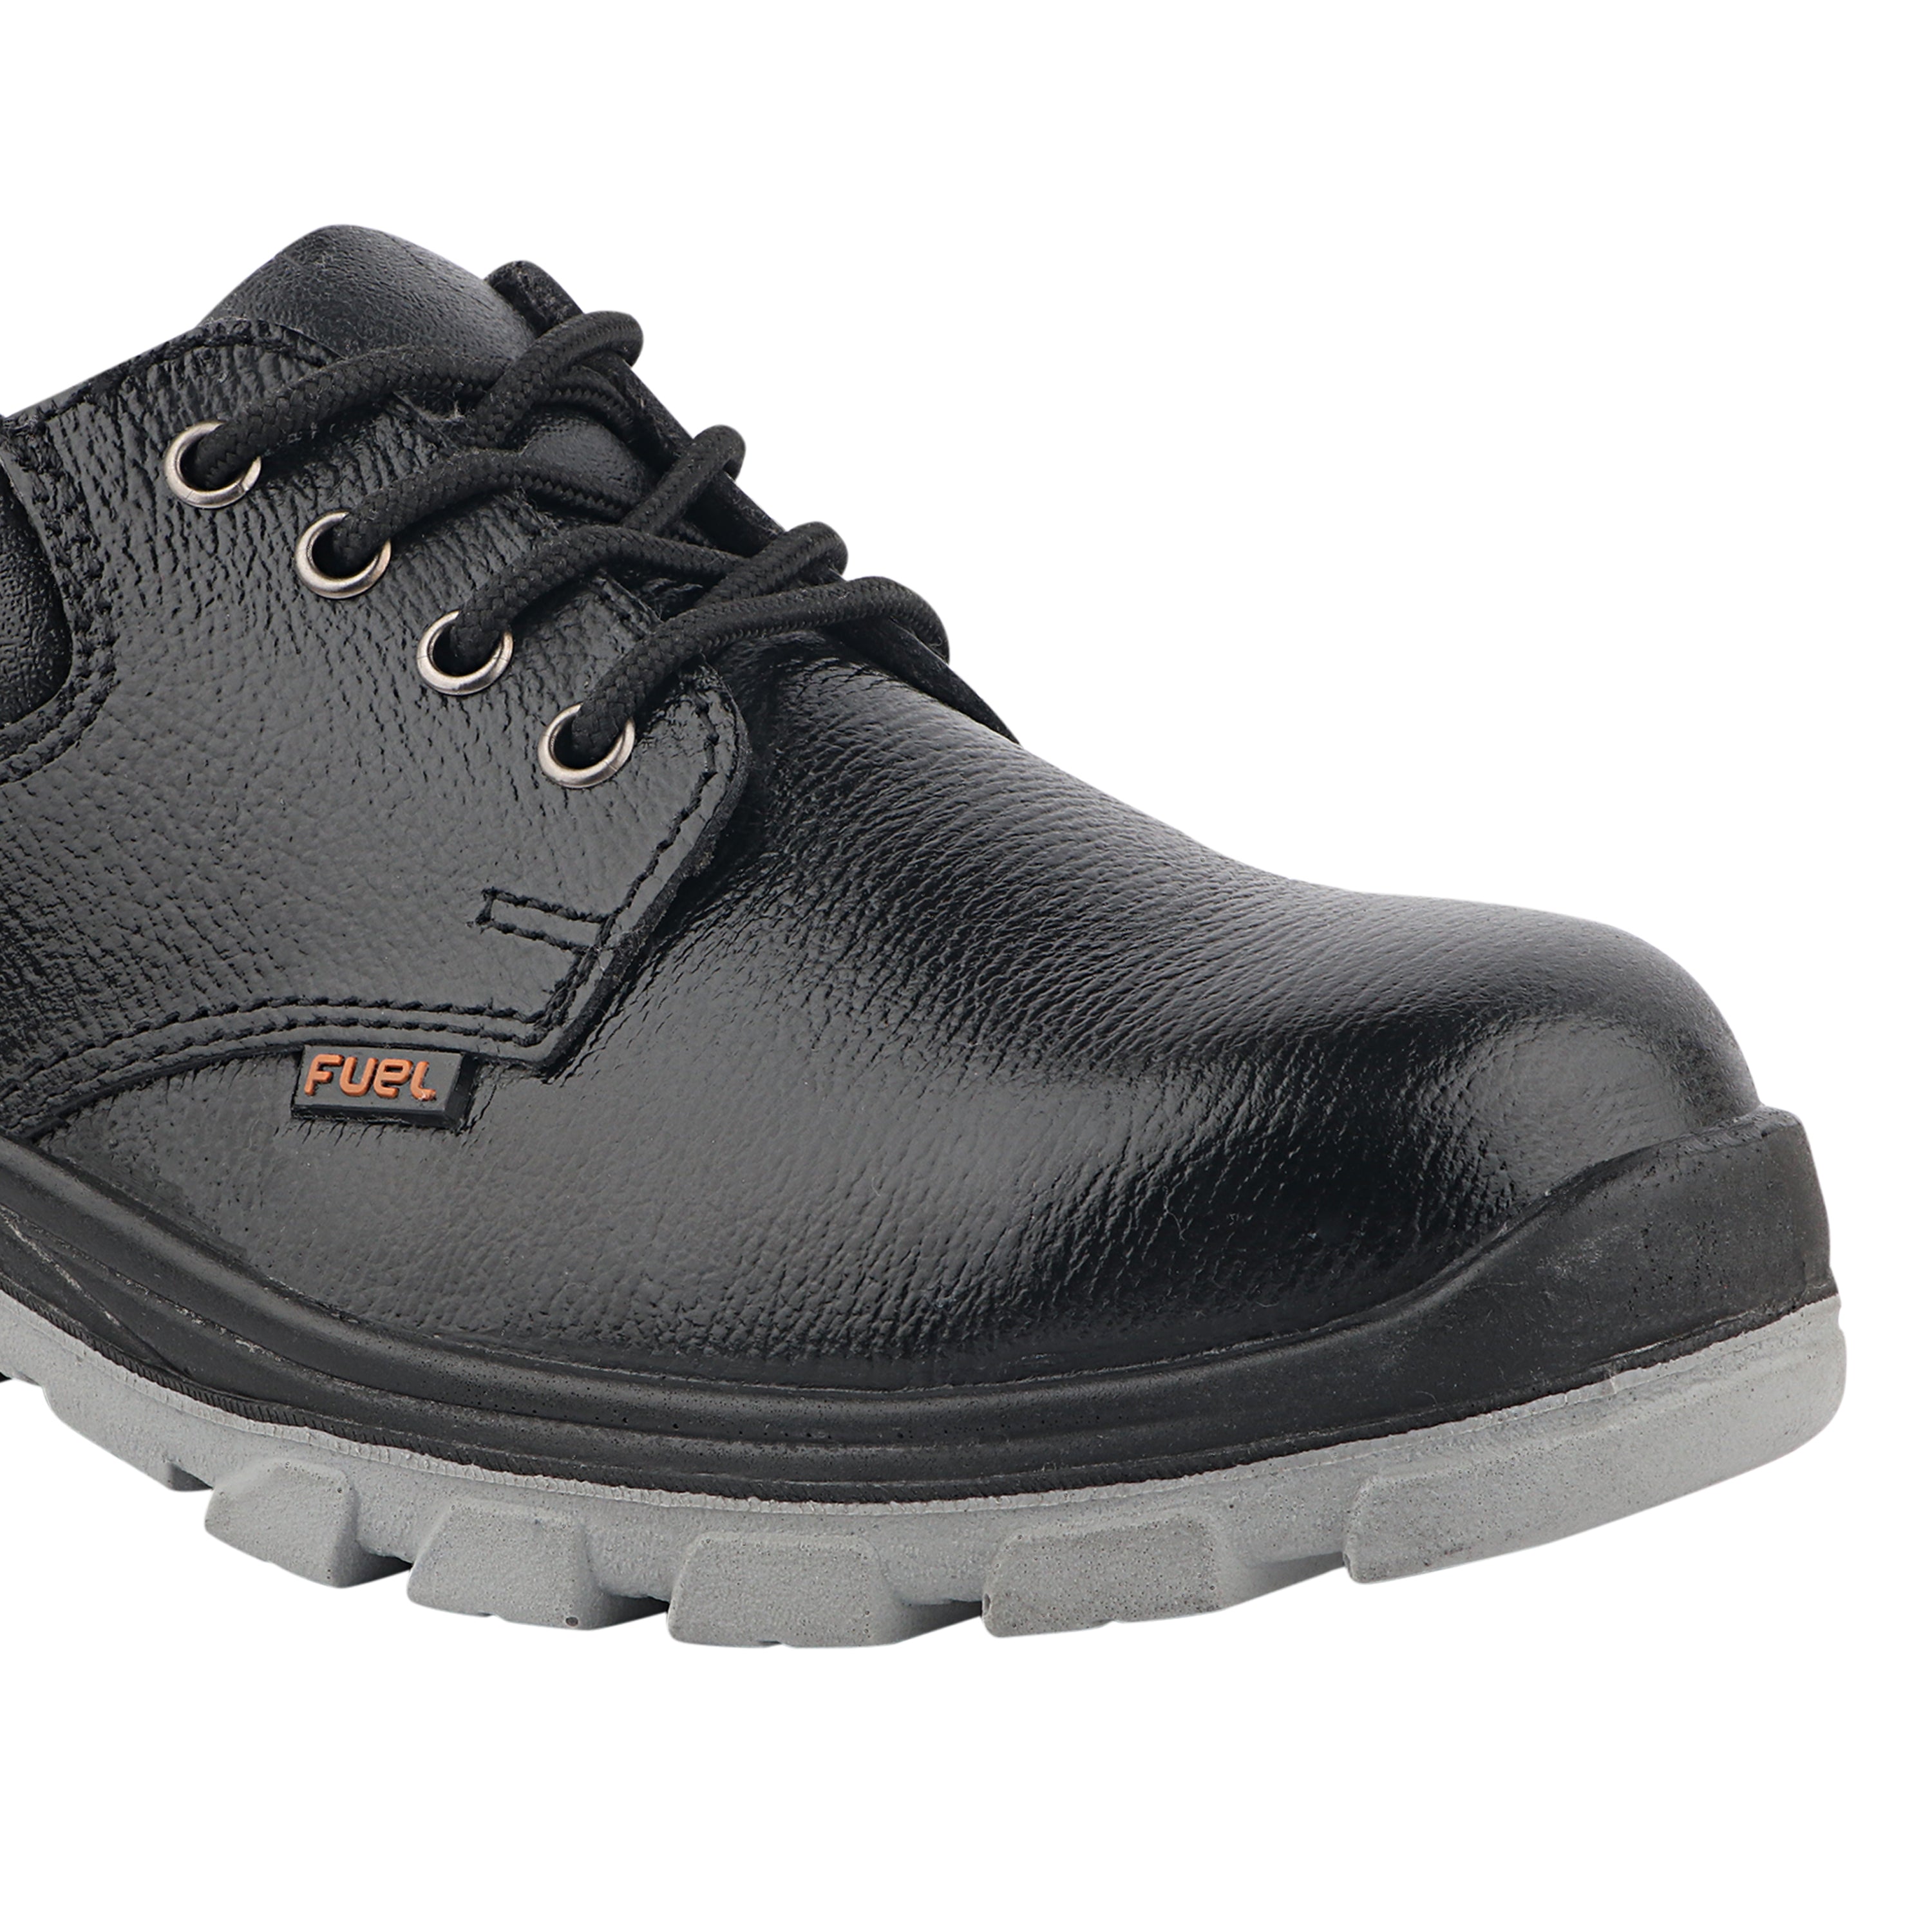 Fuel Spear Genuine Leather Safety Shoes for Men's Steel Toe Cap With Double Density PU Sole (Black)